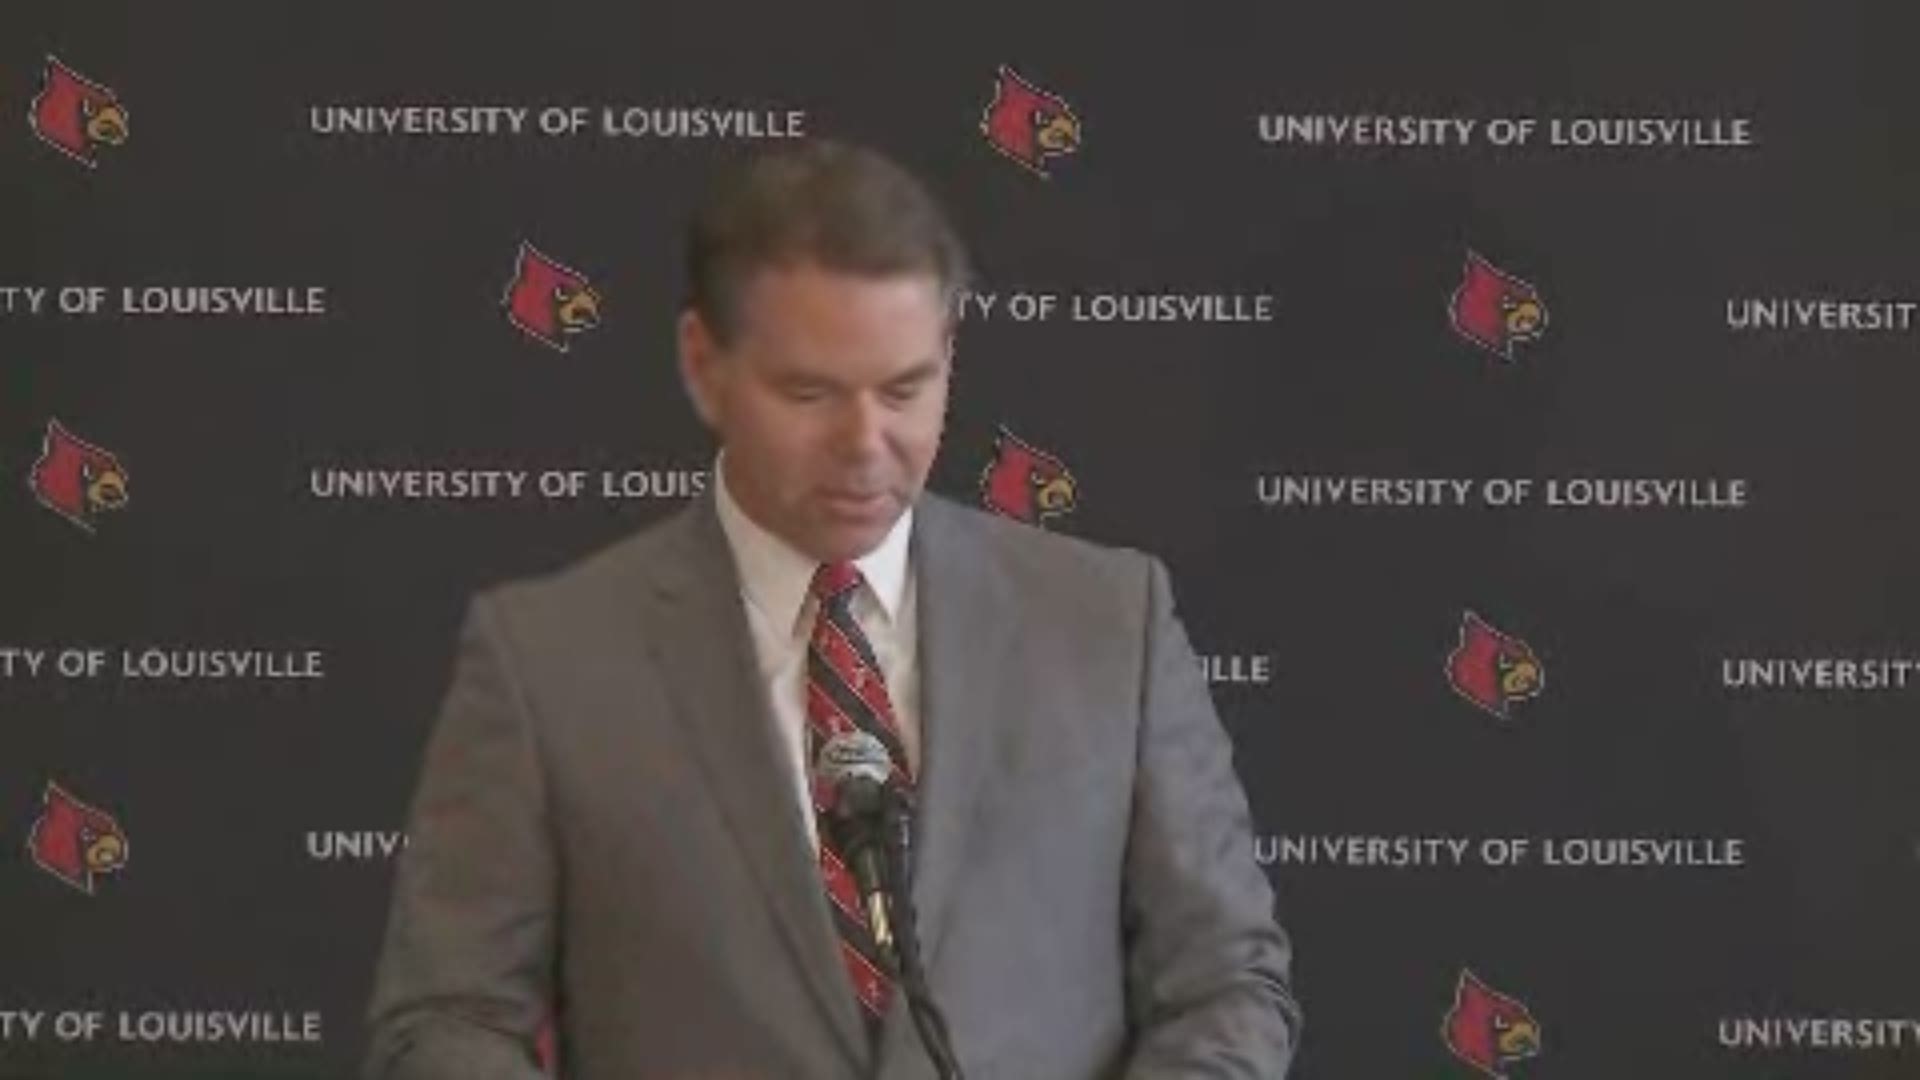 UofL Athletic Director Vince Tyra introduces Chris Mack as head coach